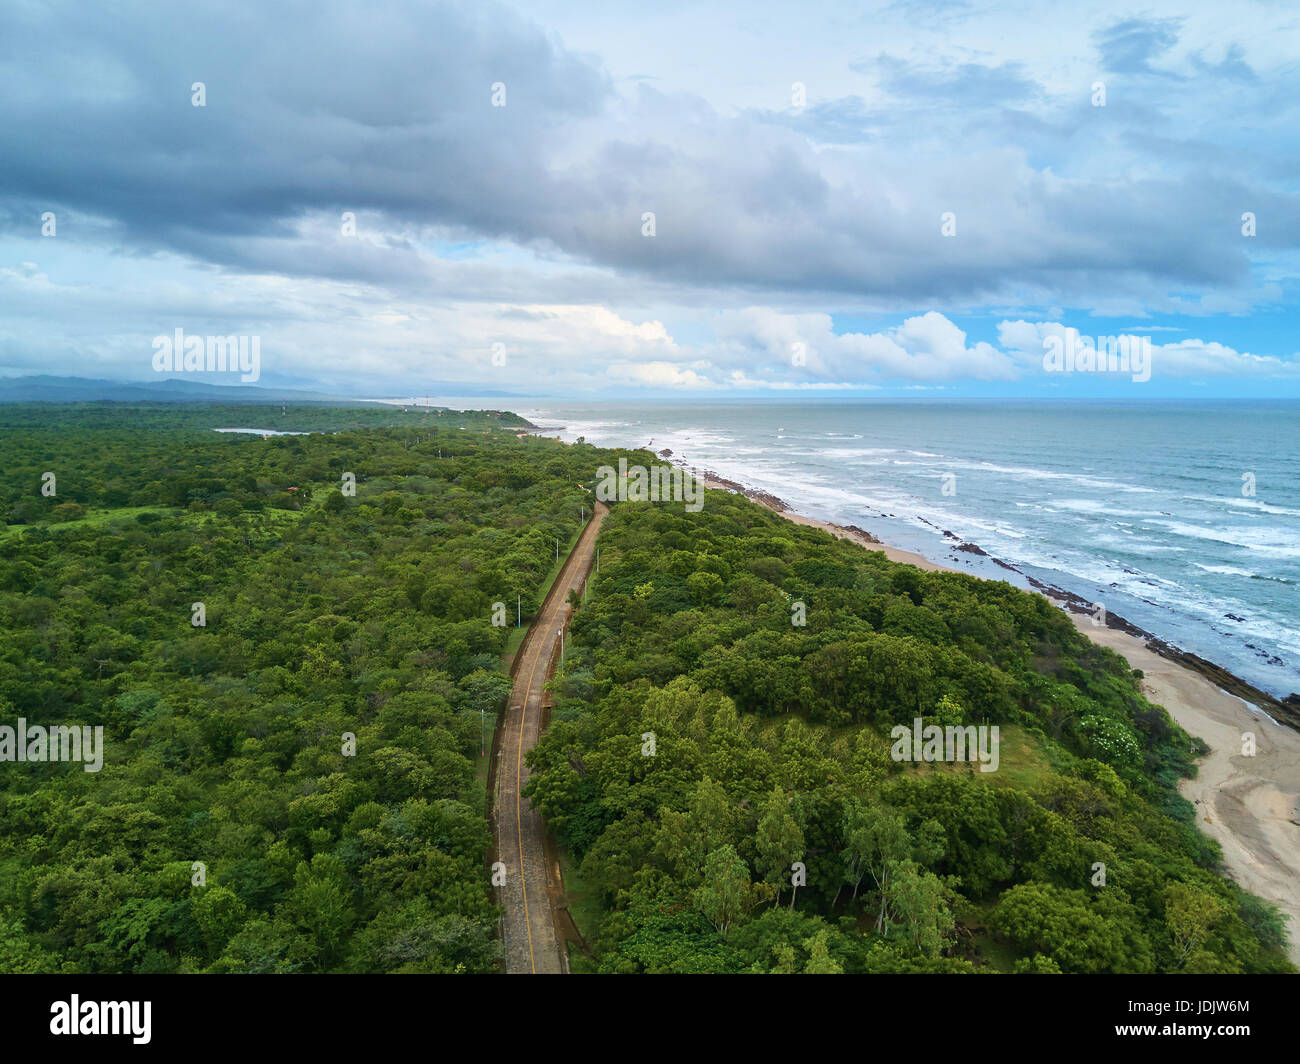 Rainy season in Pacific coast aerial view. Ocean shore with big waves Stock Photo